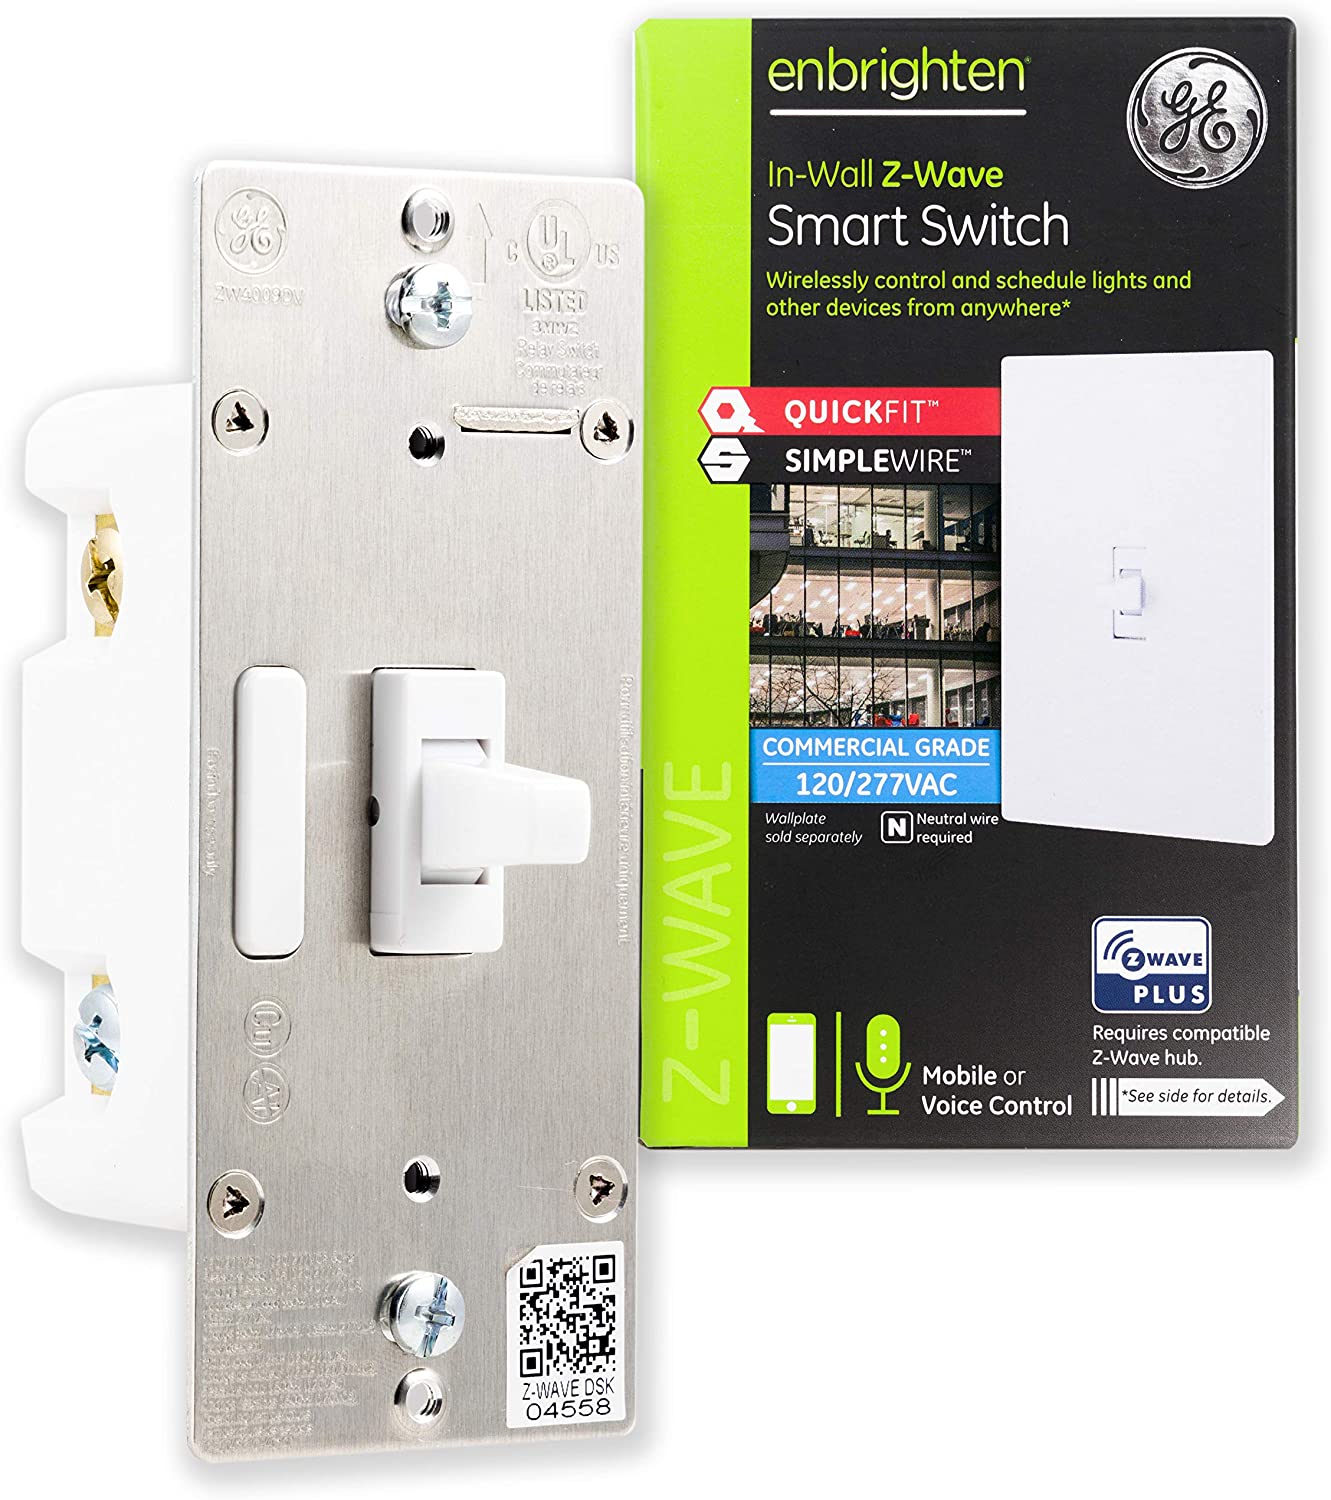 GE Enbrighten Z-Wave Plus Smart Toggle Switch, Z-Wave Hub Required, 43074, White - image 1 of 8